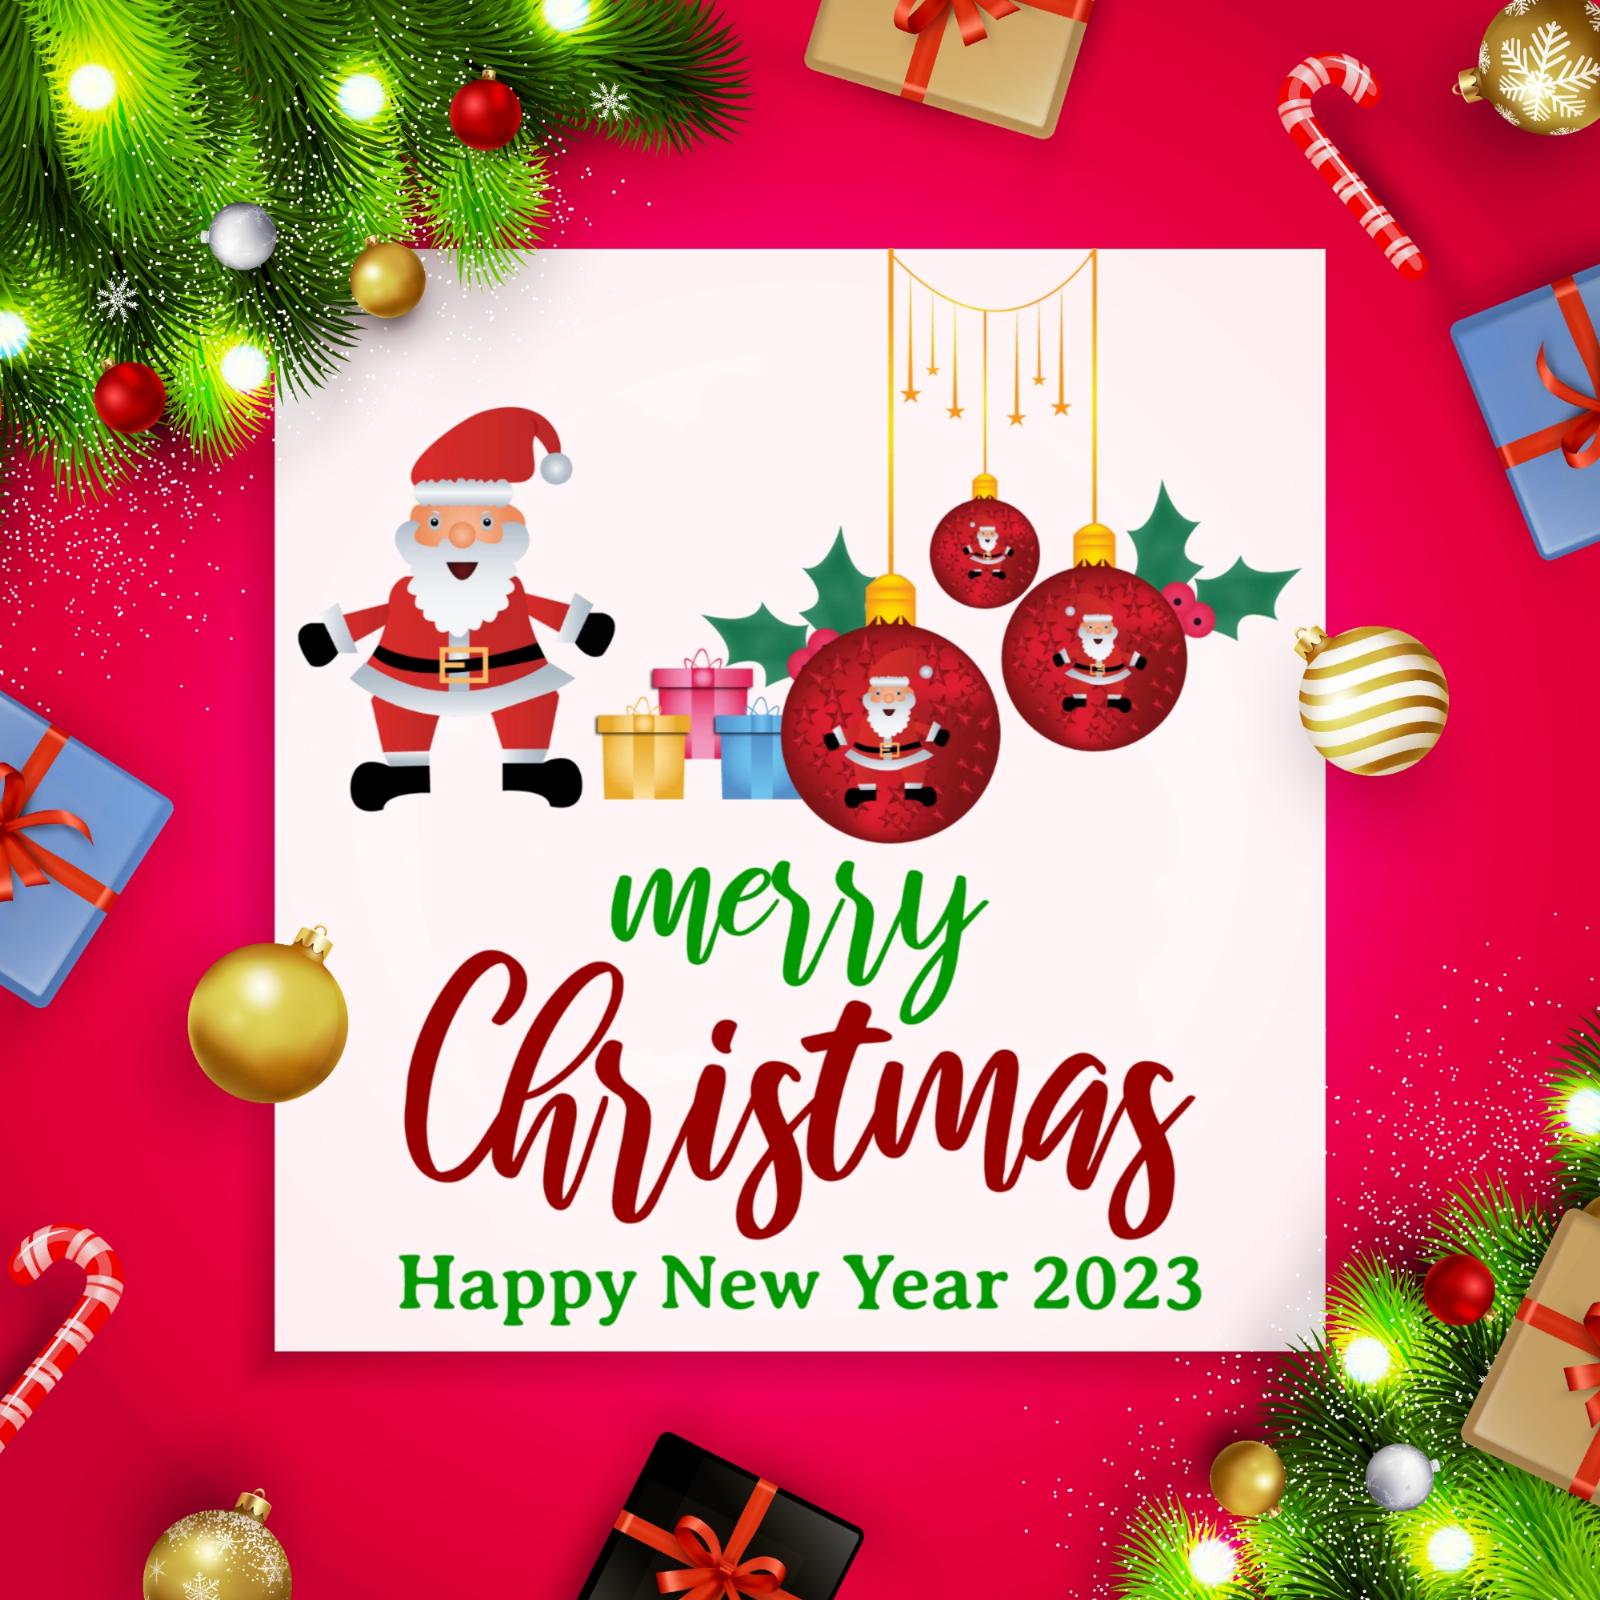 Christmas Images For Whatsapp Dp